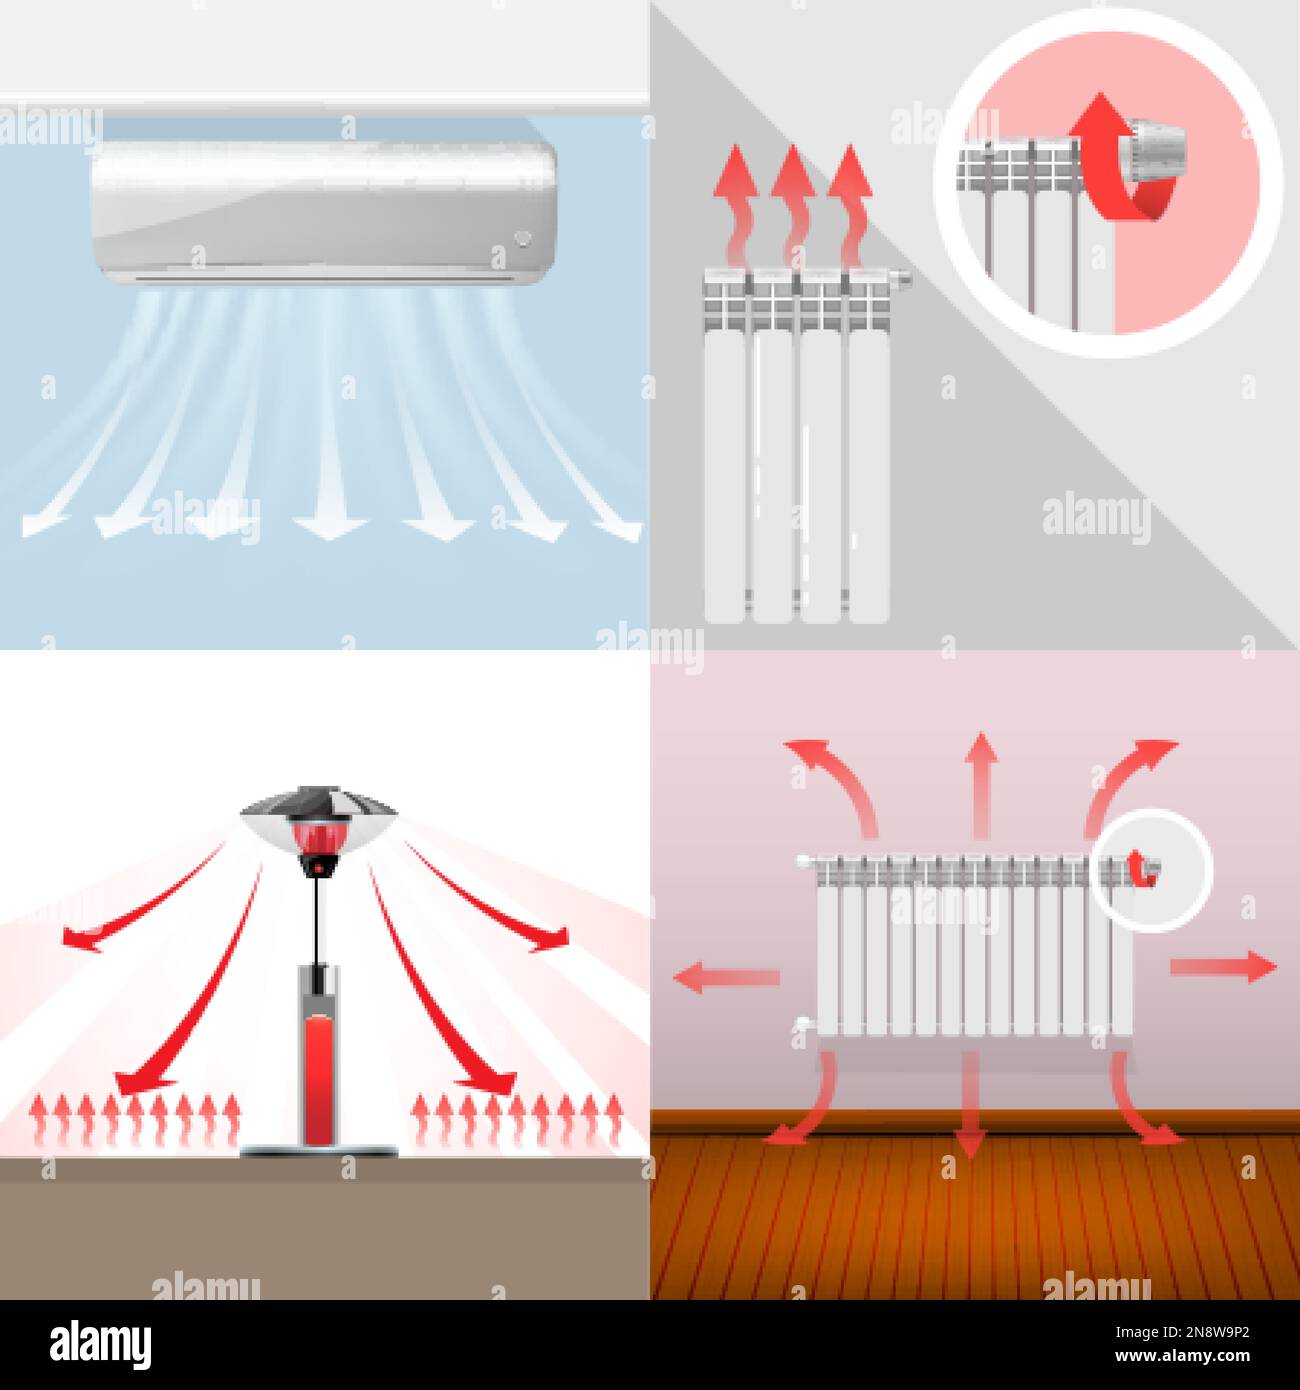 Various house and outdoor heaters with arrows showing air flows flat 2x2 set isolated vector illustration Stock Vector